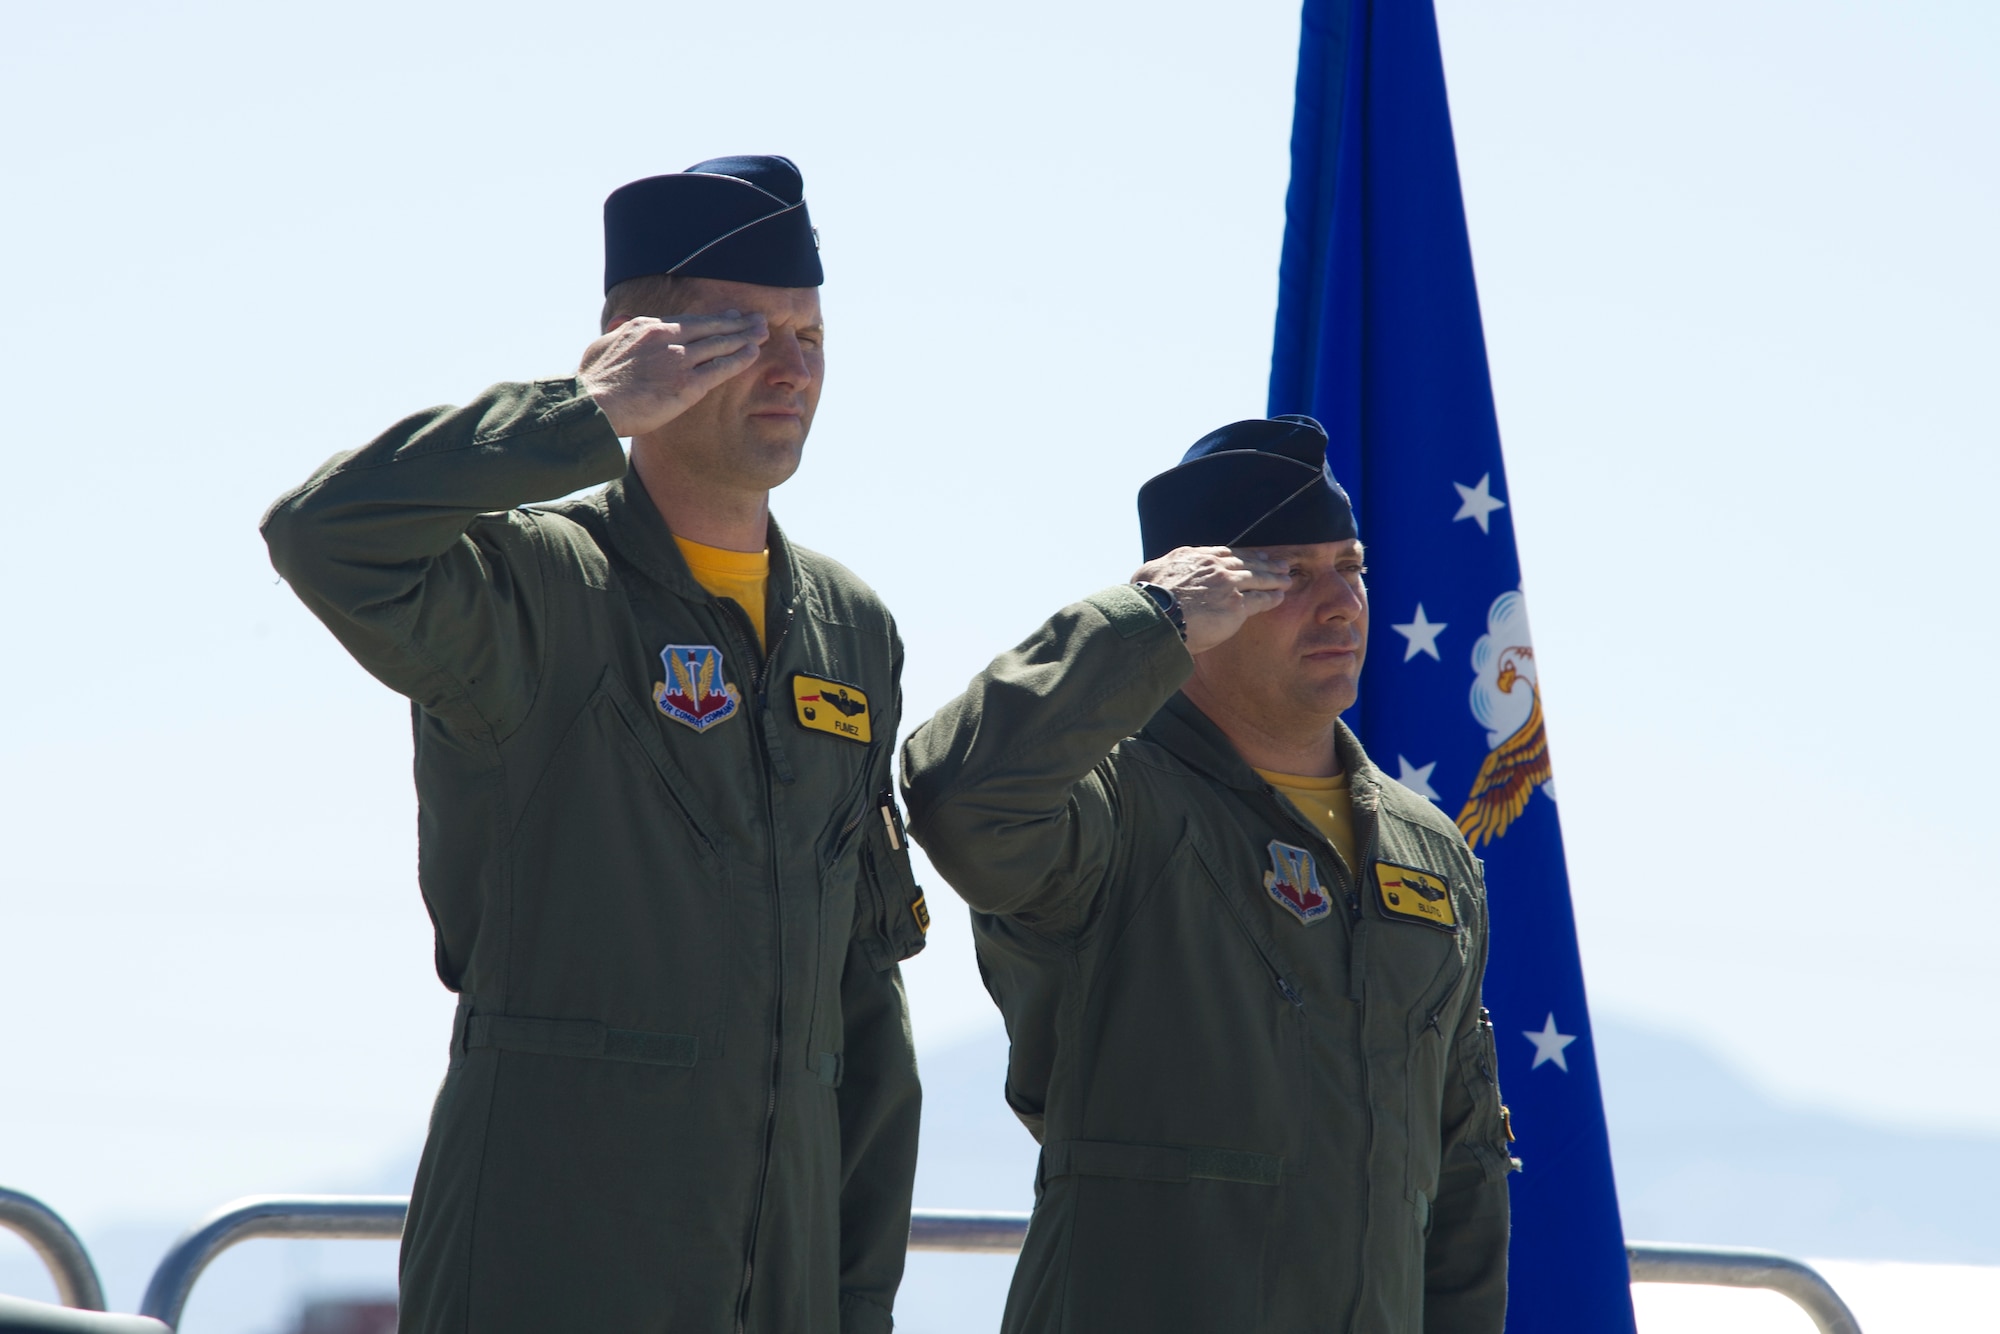 HOLLOMAN AIR FORCE BASE, N.M – Col. Kevin Huyck,  49th Operations Group commander and Lt. Col.  Craig Baker, 8th Fighter Squadron commander, render a salute during the playing of the national anthem, marking the start of the 8th FS inactivation ceremony. The 8th FS, known as the “Black Sheep,” was first activated in January 1941 and its mission and aircraft have transitioned several times to support the emerging needs of the Air Force. Starting with the P-40 Warhawk, the “Black Sheep” have led the way in fielding, flying and employing the Air Force’s newest air superiority aircraft. Currently flying the F-22 Raptor, the unit’s inactivation means that its Airman and aircraft will be relocated to other units on Holloman. The famed “Black Sheep”” patch, name, and colors will be maintained by Air Force historians for reactivation when needed. (U.S. Air Force photo by Tech Sgt. Joe Laws / Released)